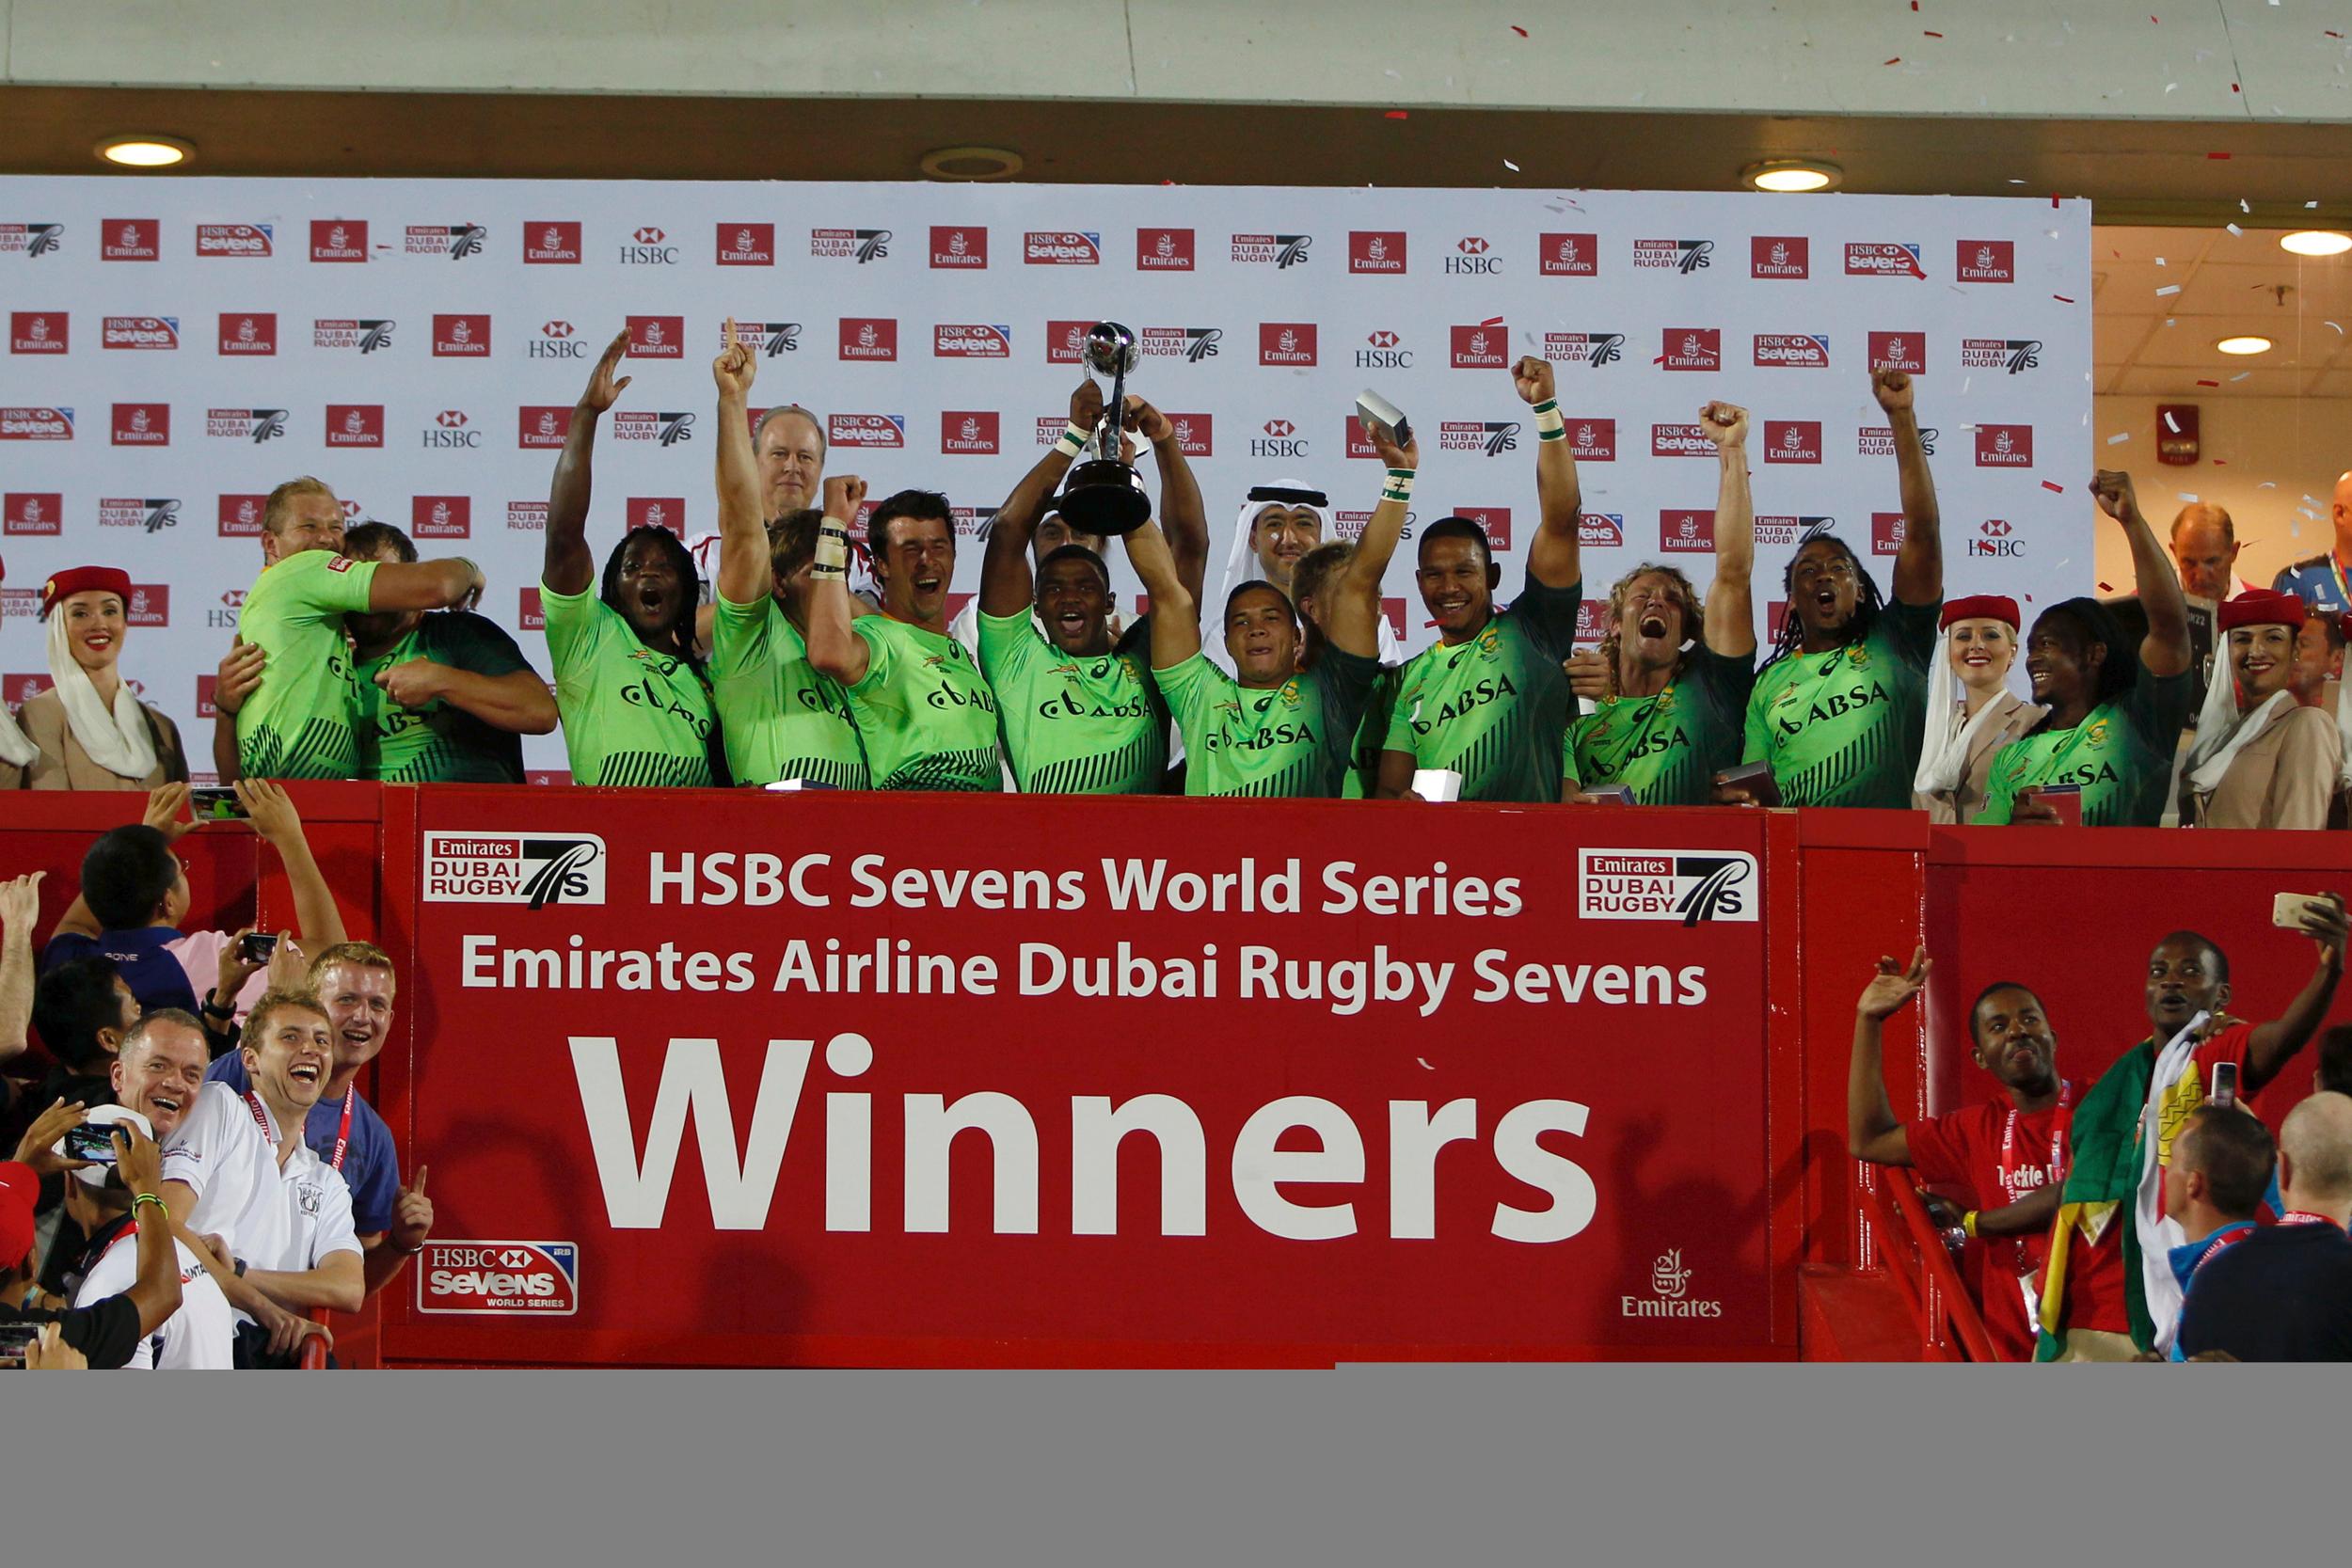 South Africa over powered Australia to cruise to a 33-7 victory in the Emirates Airline Dubai Sevens Cup ©WorldRugby